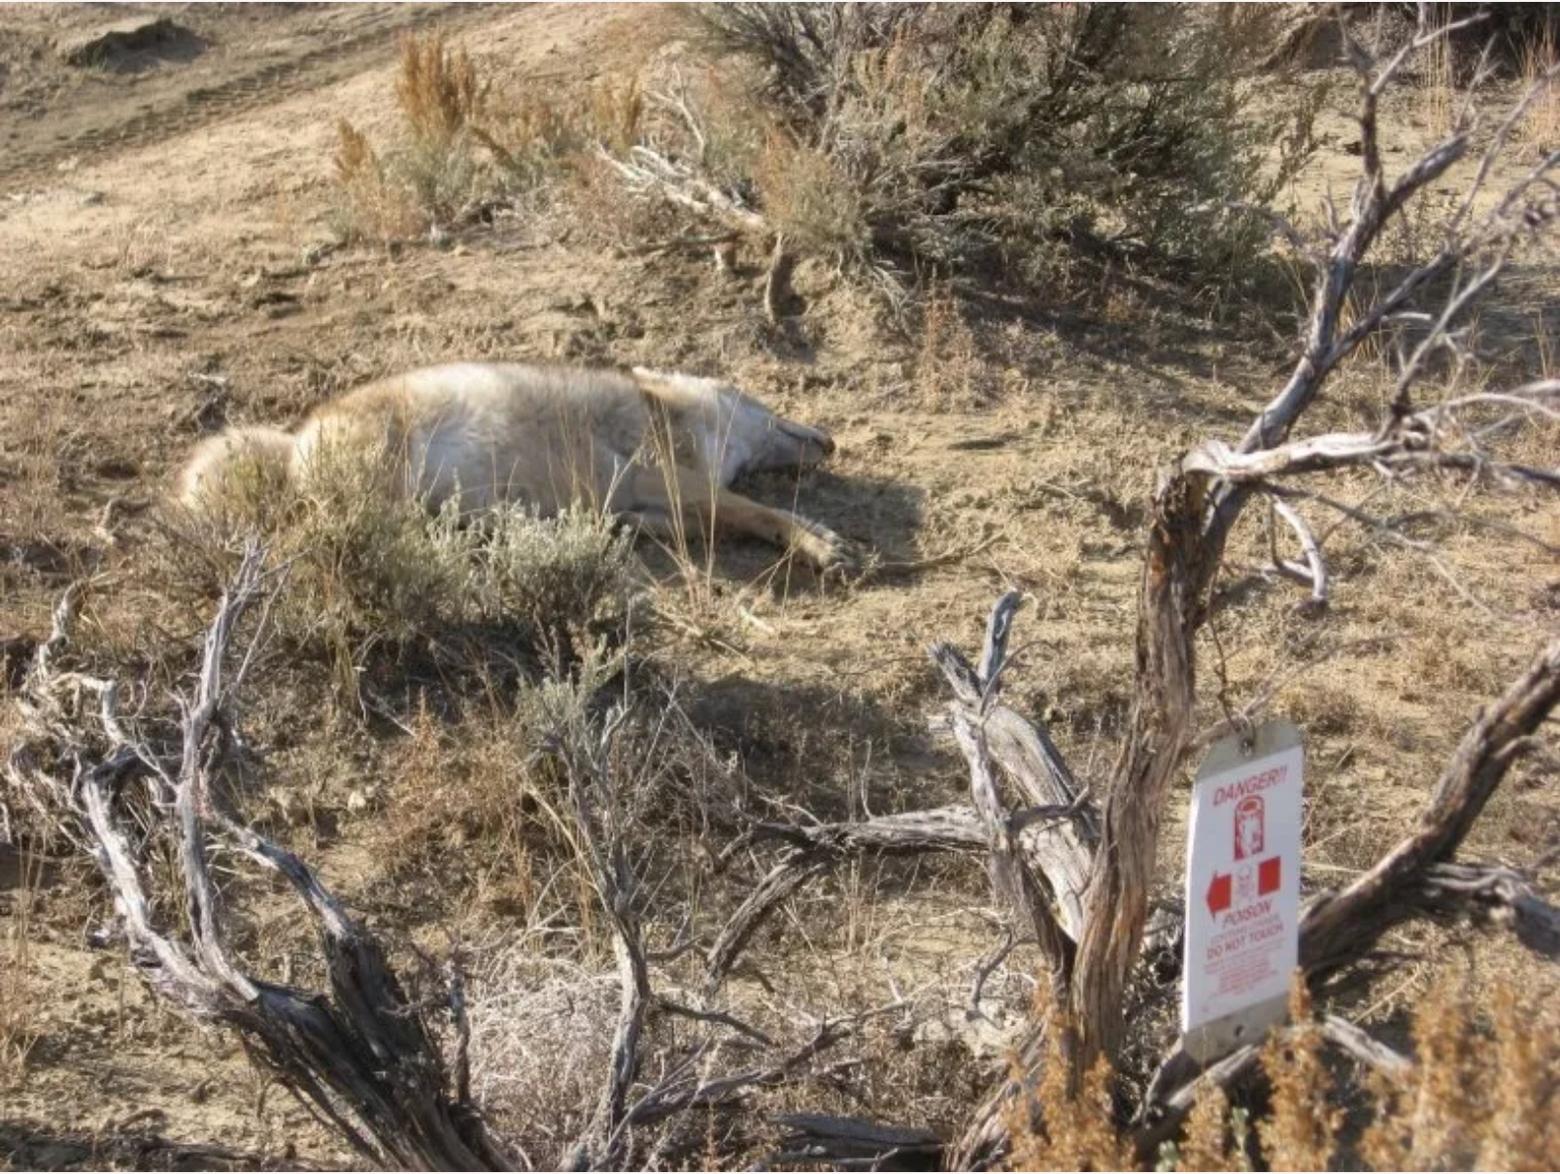 M-44 “cyanide bombs” often indiscriminately injure and kill non-target species. These incidents have implicated more than 20 species of non-target wildlife, domestic dogs and humans, according to the Center for Biological Diversity. The federal agency Wildlife Services, which primarily uses the devices, says in 2018 alone it used M-44s to kill 6,579 animals. Photo courtesy Wildlife Services